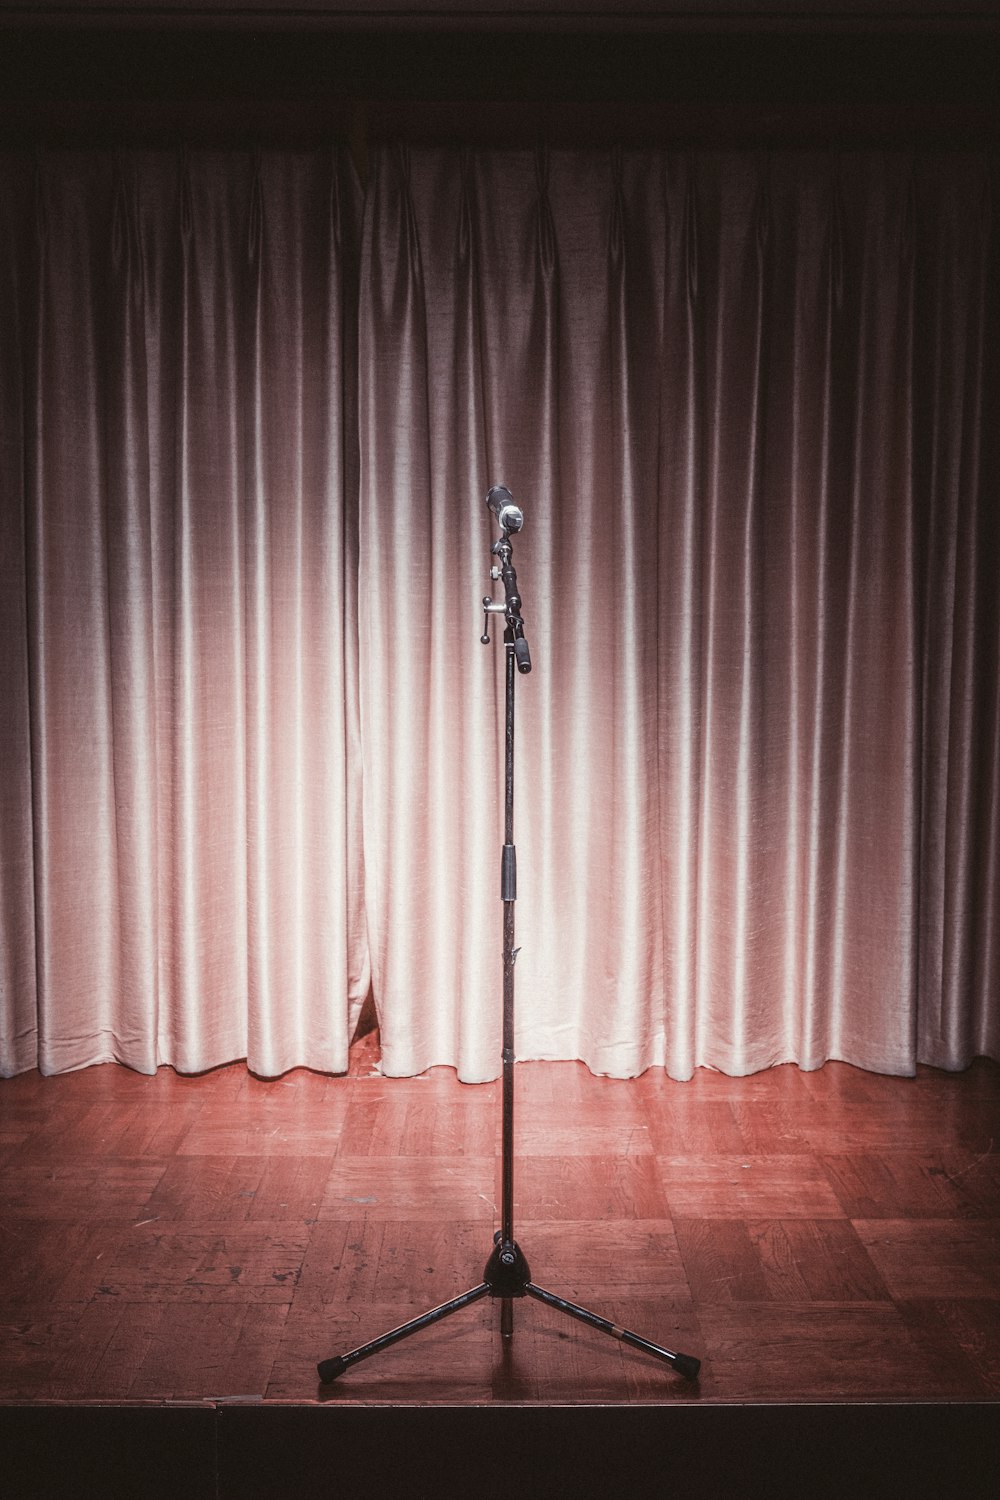 a microphone on a stand in front of a curtain